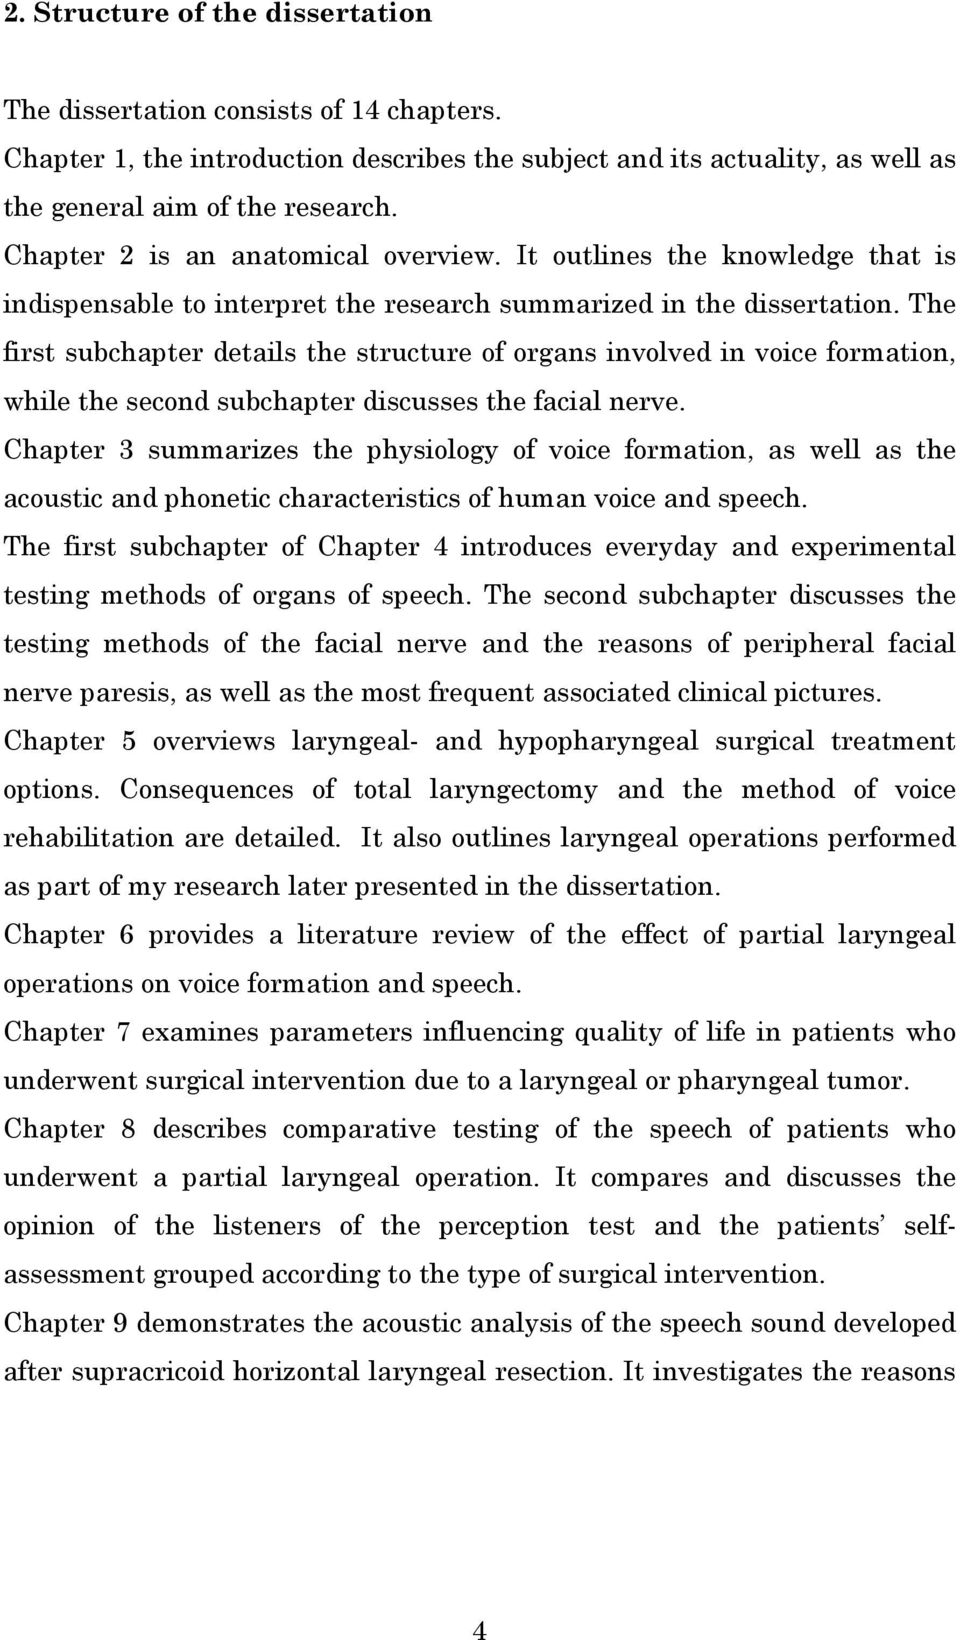 The first subchapter details the structure of organs involved in voice formation, while the second subchapter discusses the facial nerve.